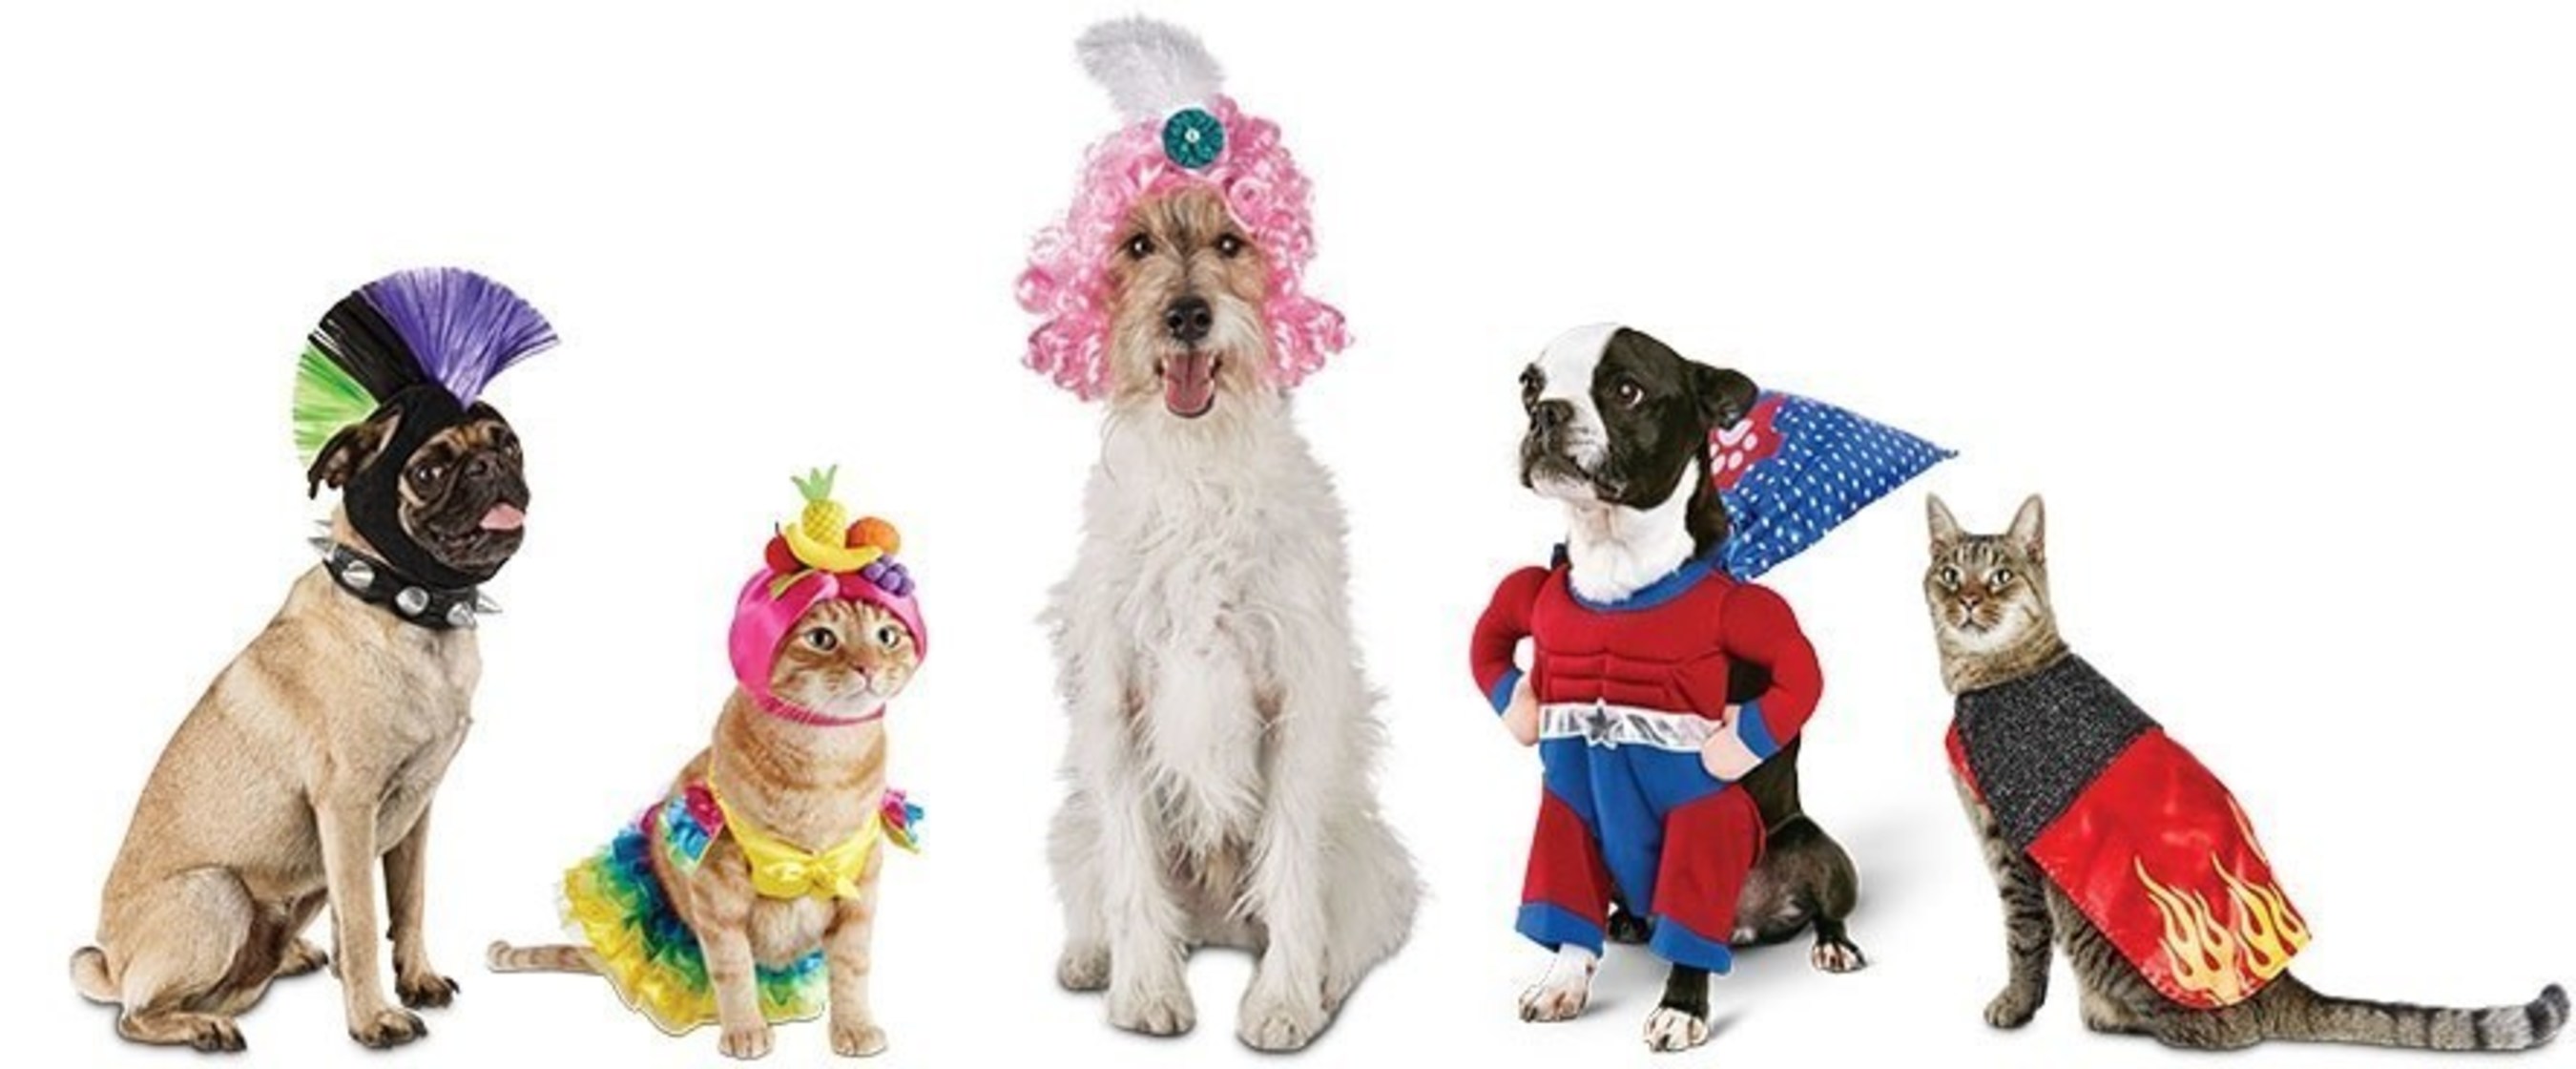 Petco has festive pet parents and their pets covered with a fun assortment of pet costumes and accessories